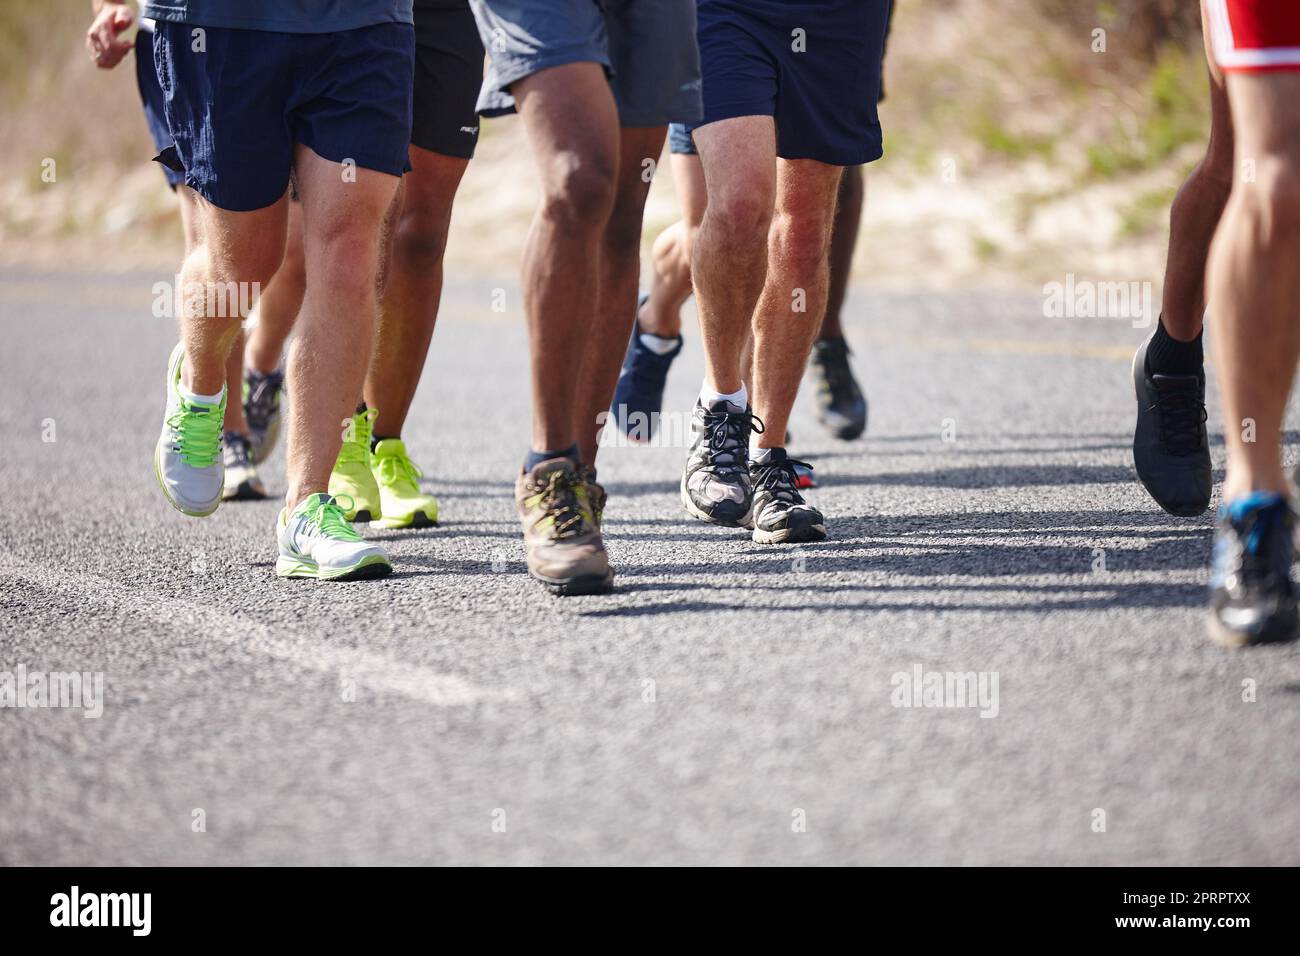 No pain, no gain. Work those legs. the legs of a group of men running a road race. Stock Photo